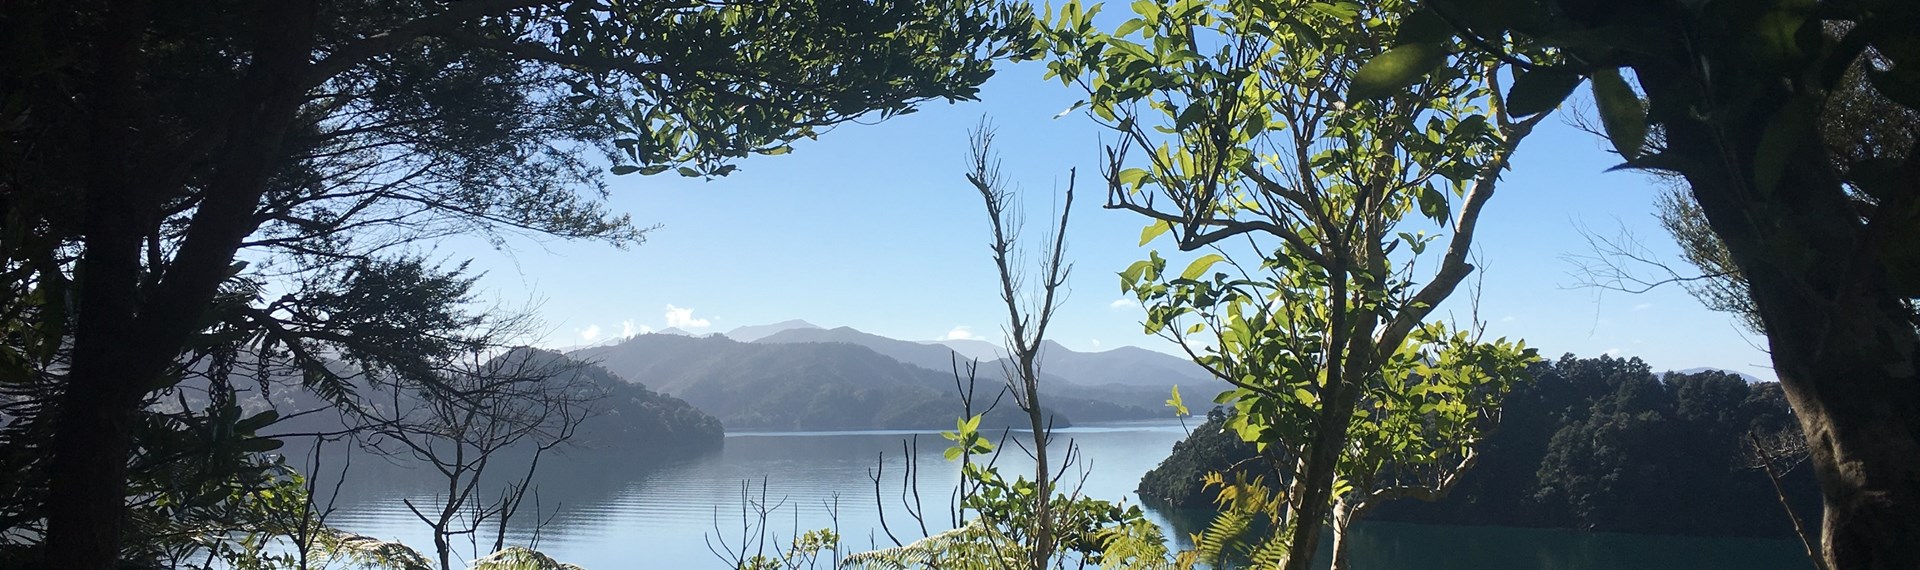 A stunning view across Ngakuta Bay in Grove Arm, near Picton in the Marlborough Sounds, is visible through native New Zealand bush.